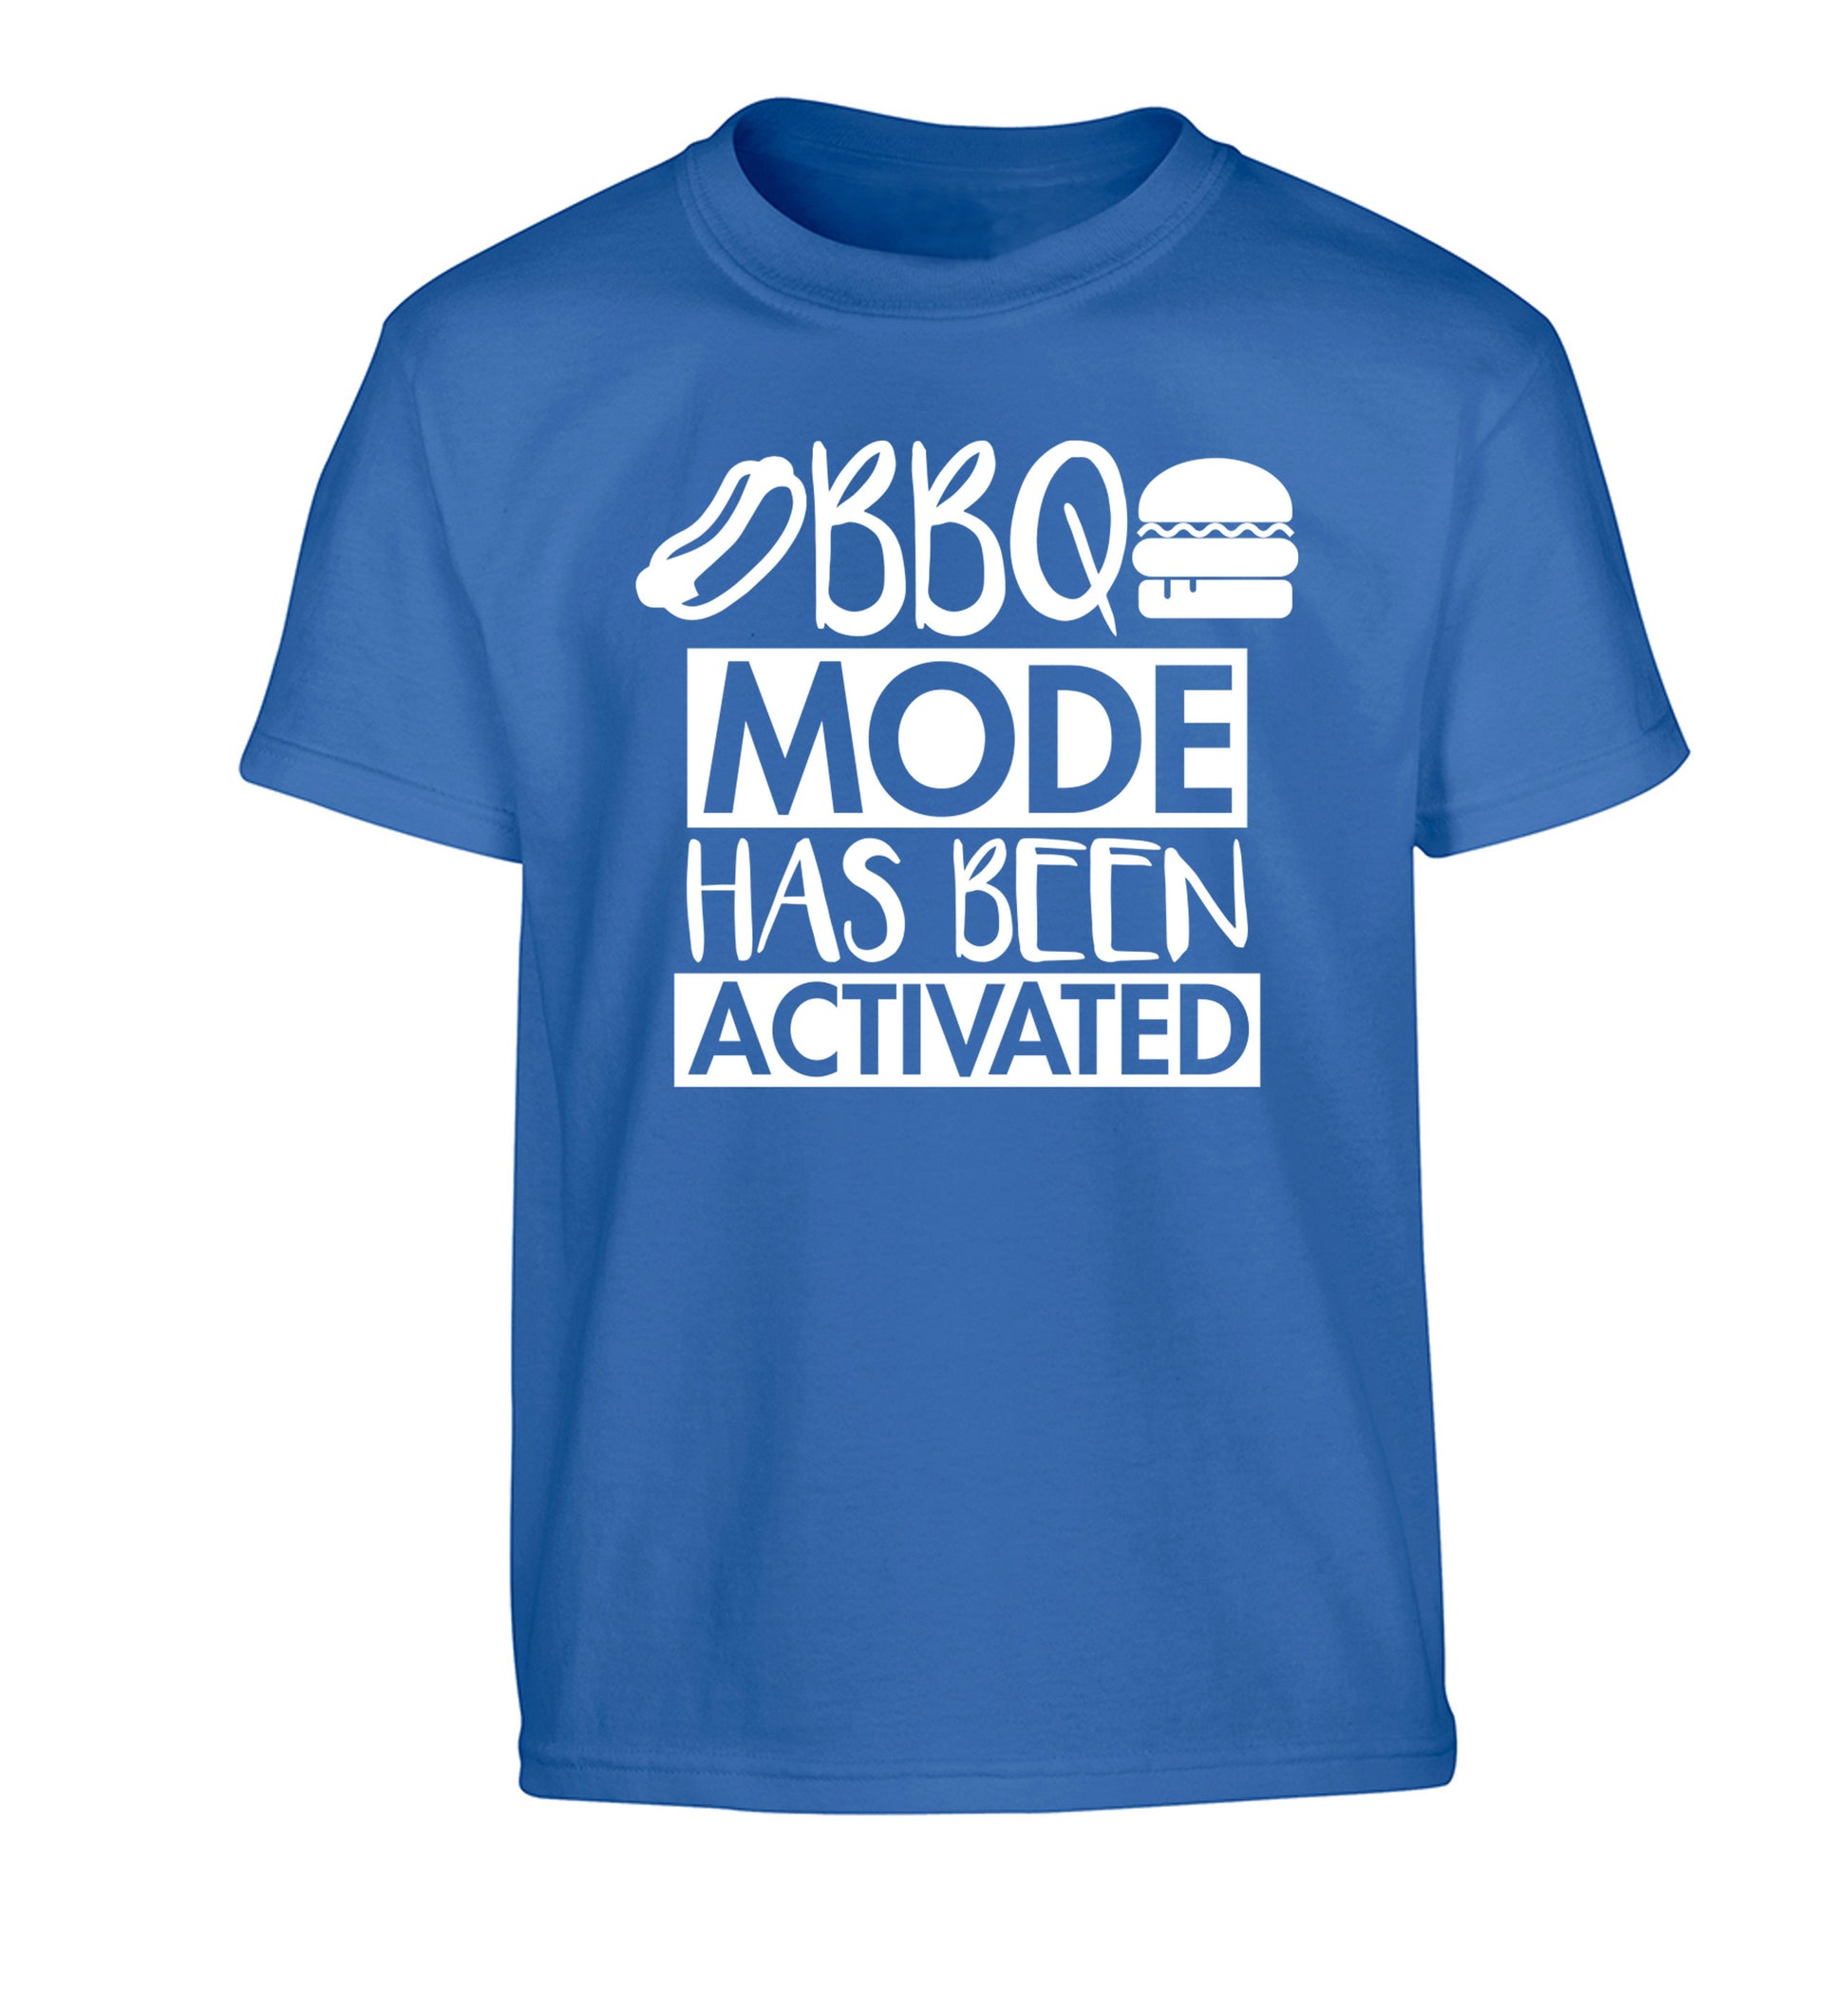 Bbq mode has been activated Children's blue Tshirt 12-14 Years